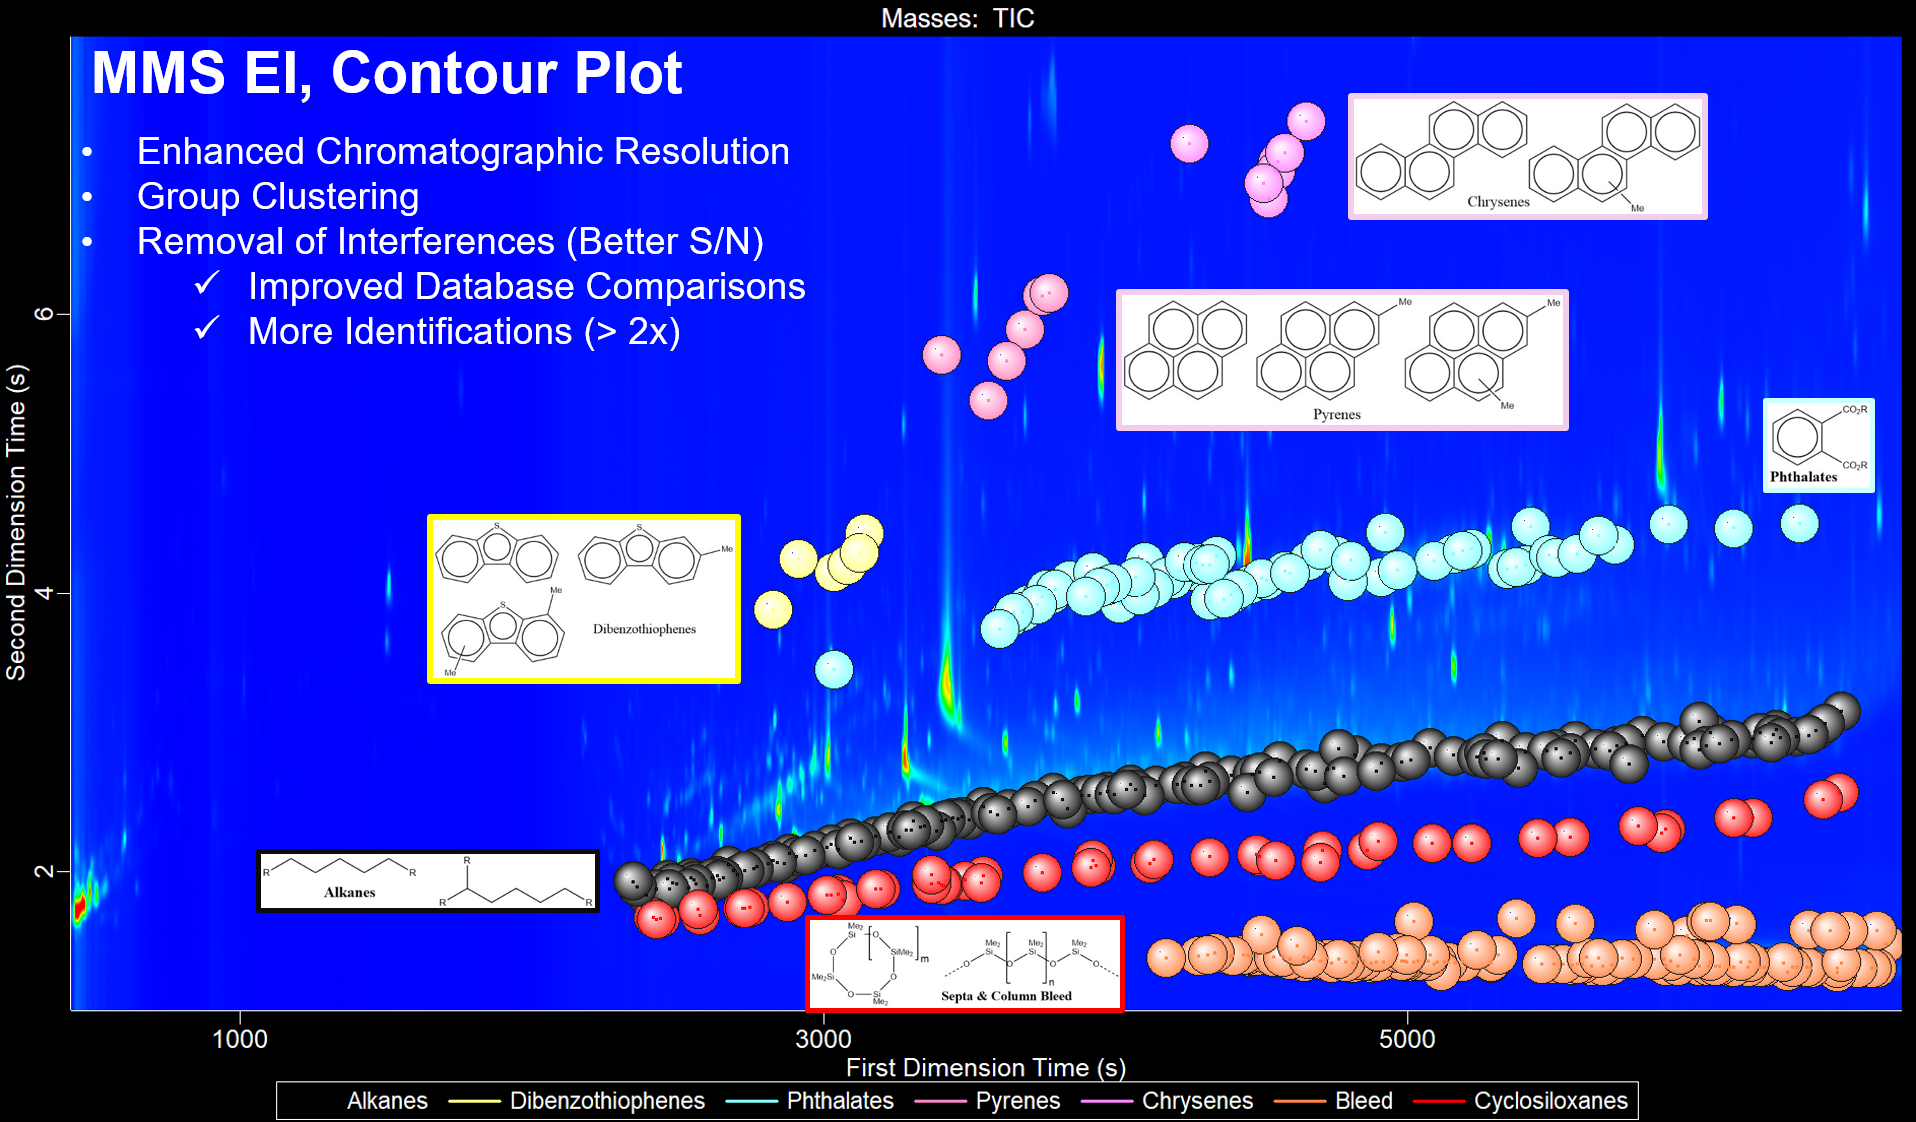 Figure 1: MMS EI, contour plot: a contour plot displaying some of the major constituents in the SRM. Features include enhanced chromatographic resolution, group clustering, and removal of interferences with improved S/N. Removed interferences improves database comparisons and identification.